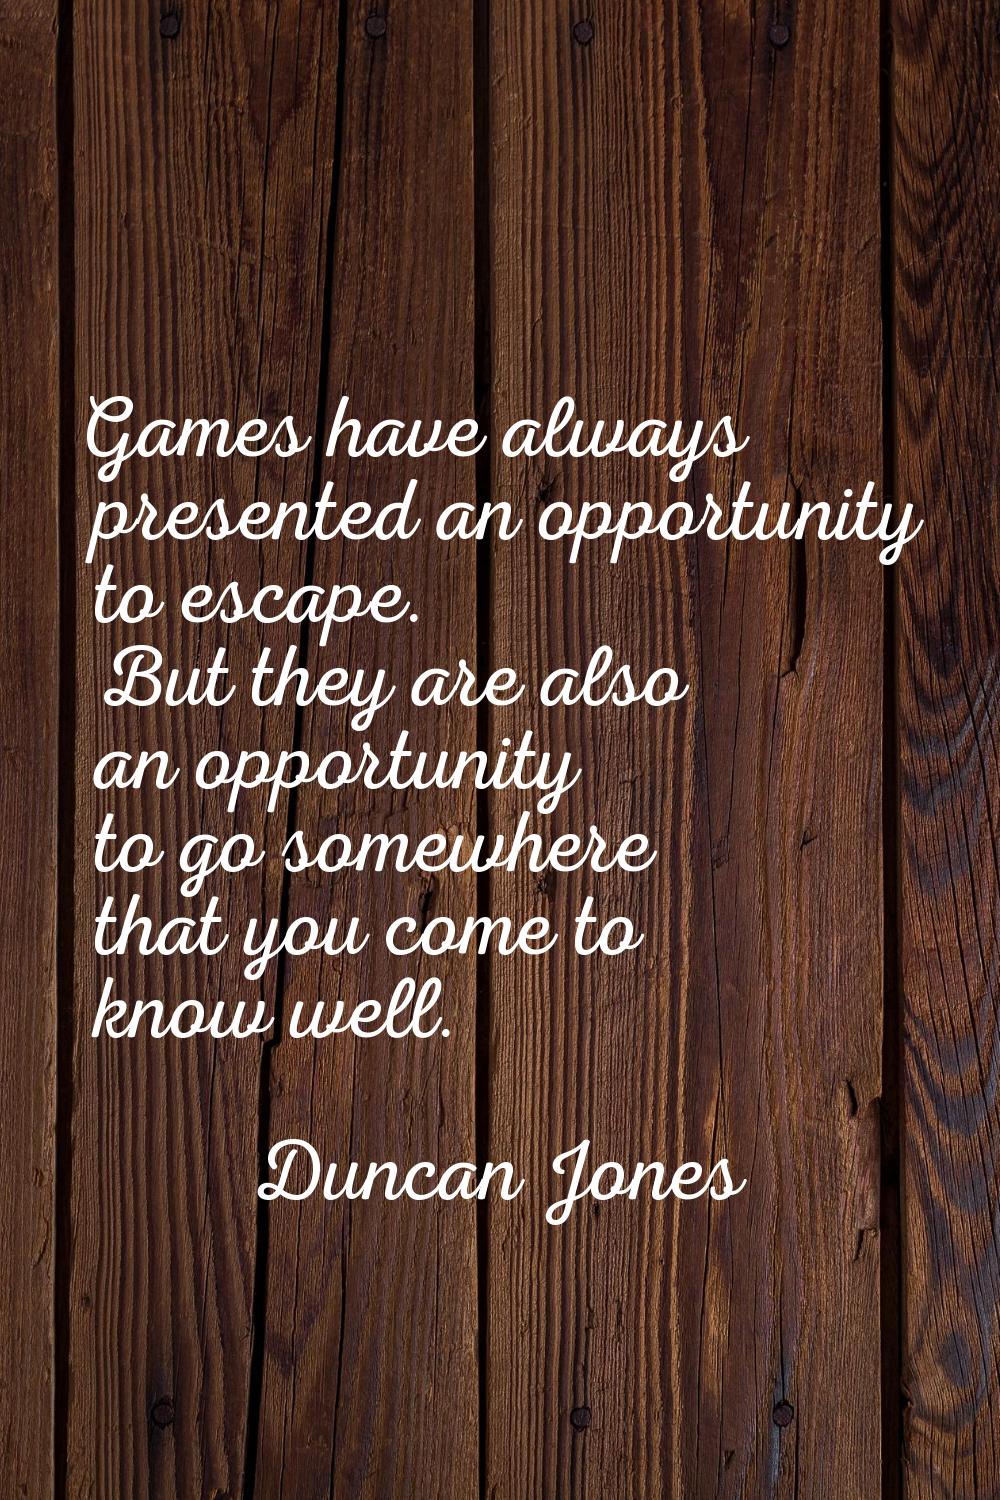 Games have always presented an opportunity to escape. But they are also an opportunity to go somewh